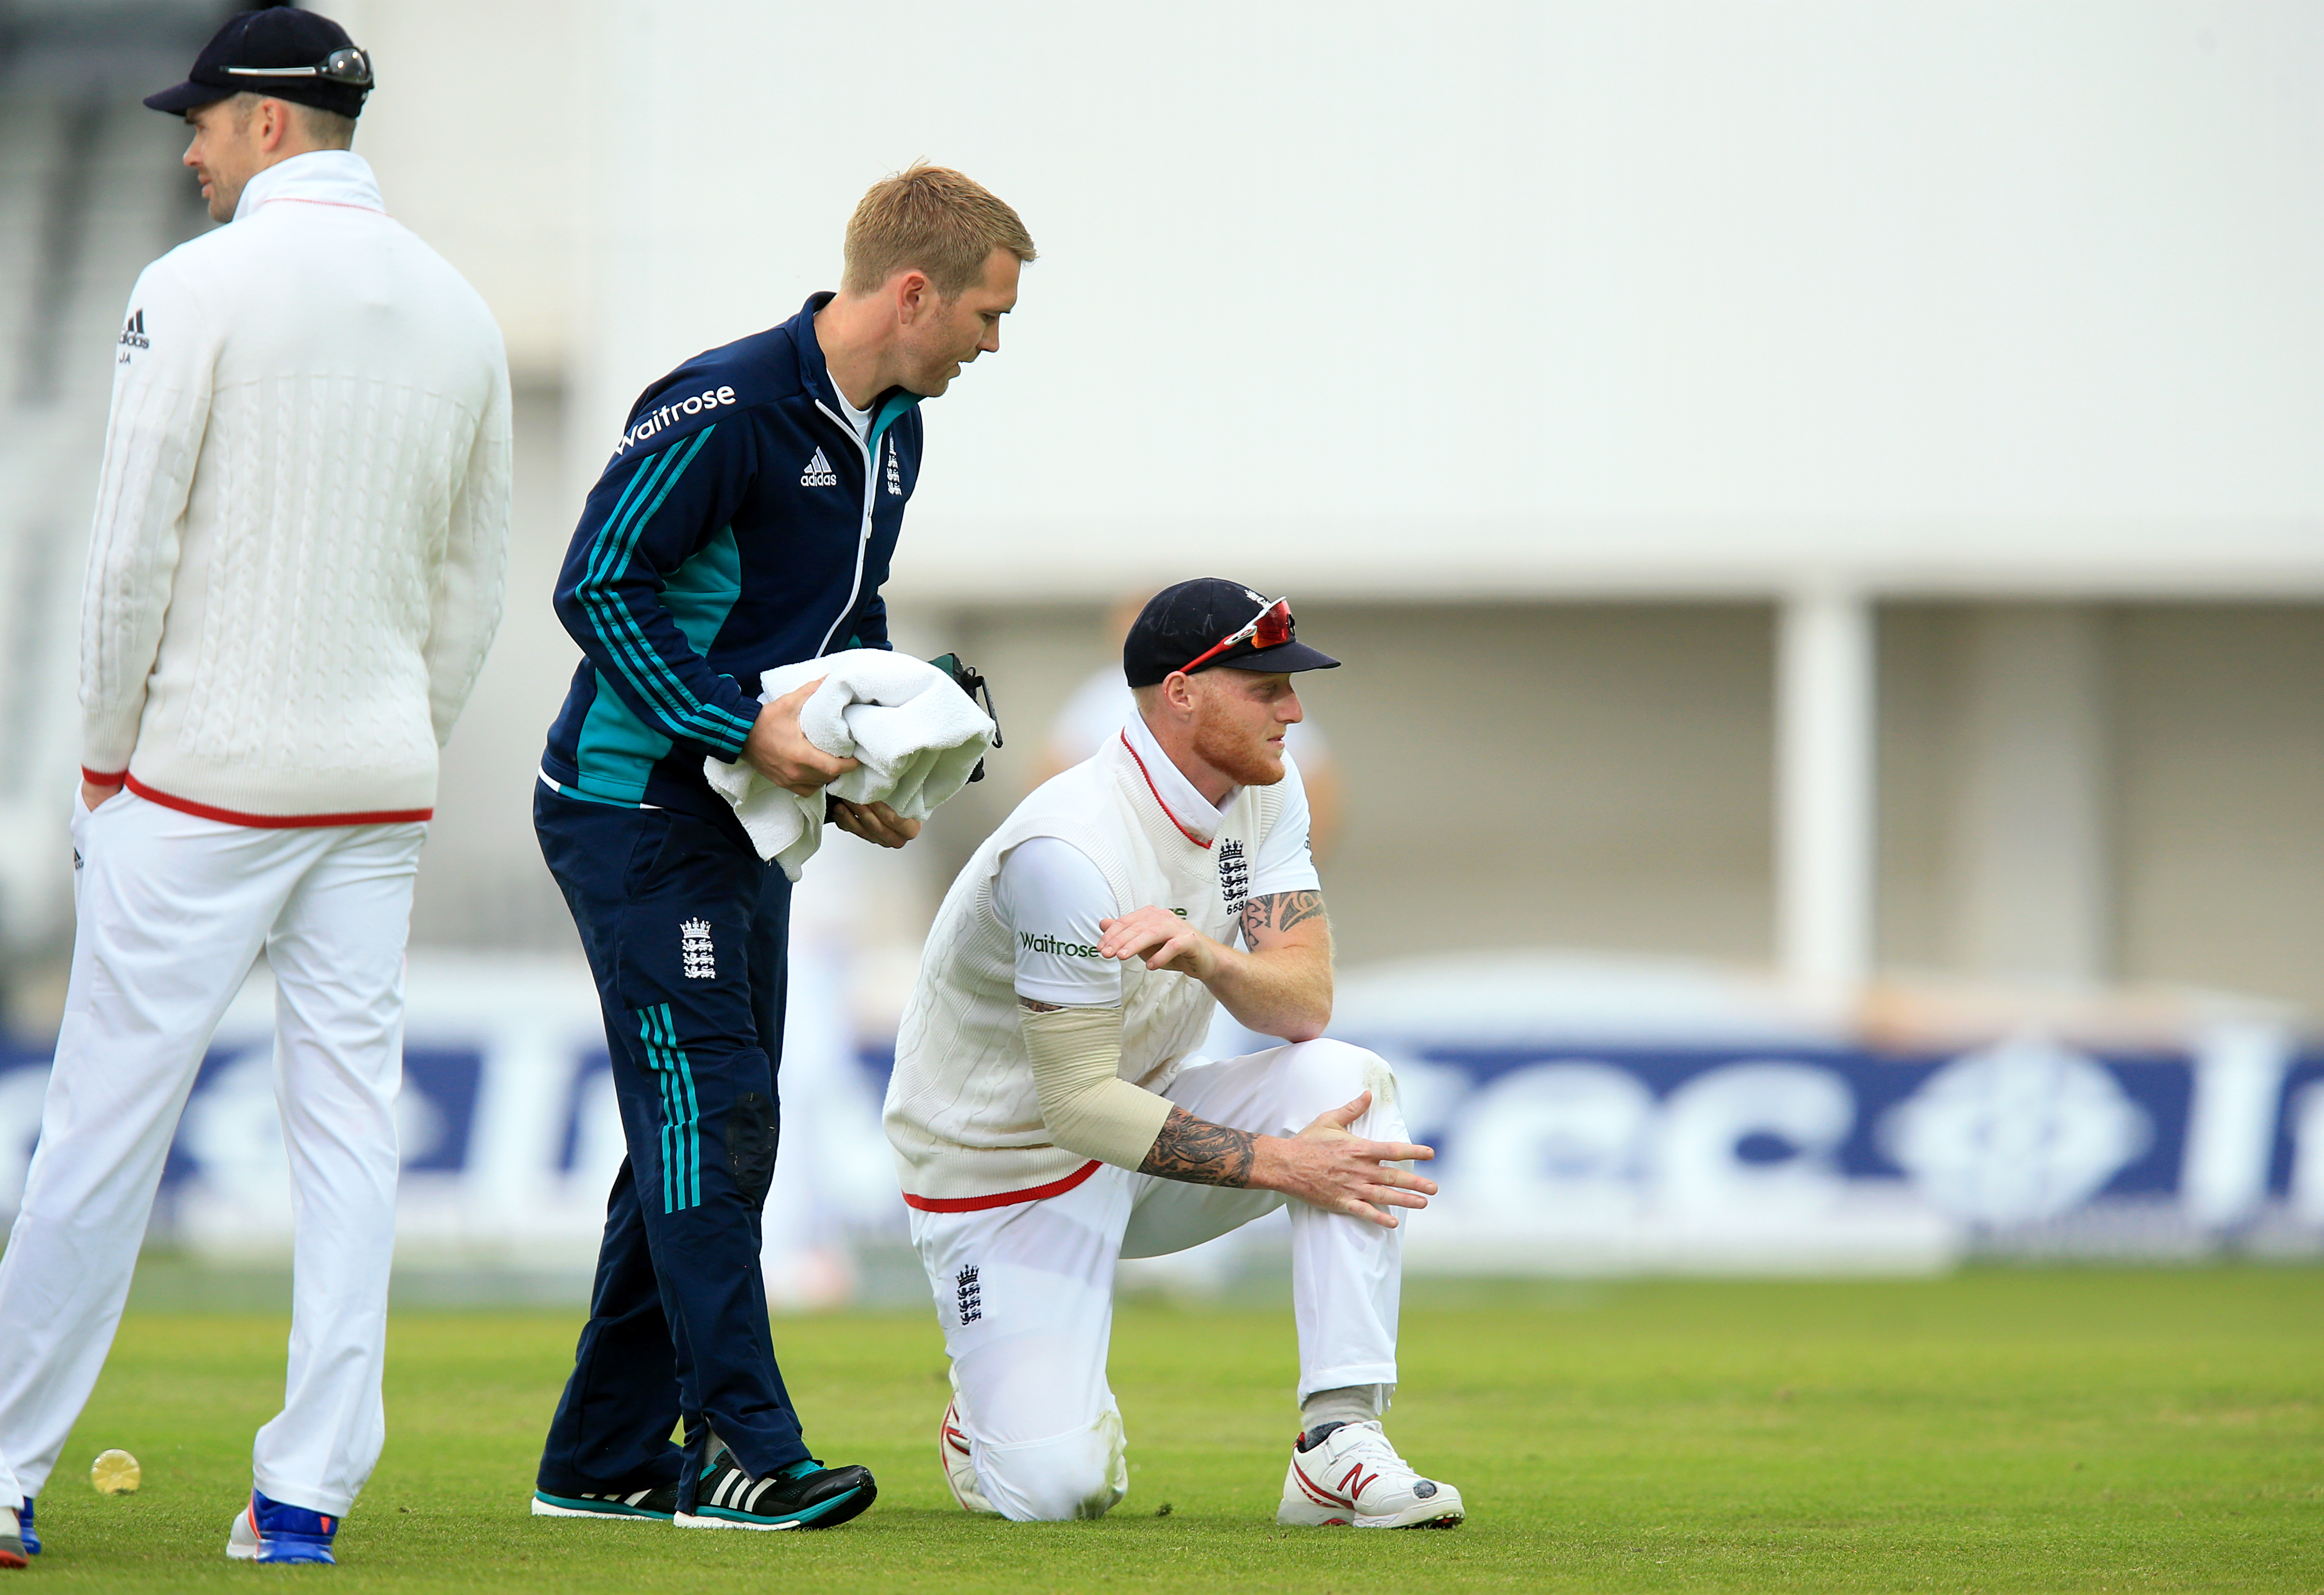 Stokes is recovering from knee surgery after confronting a long-term injury.